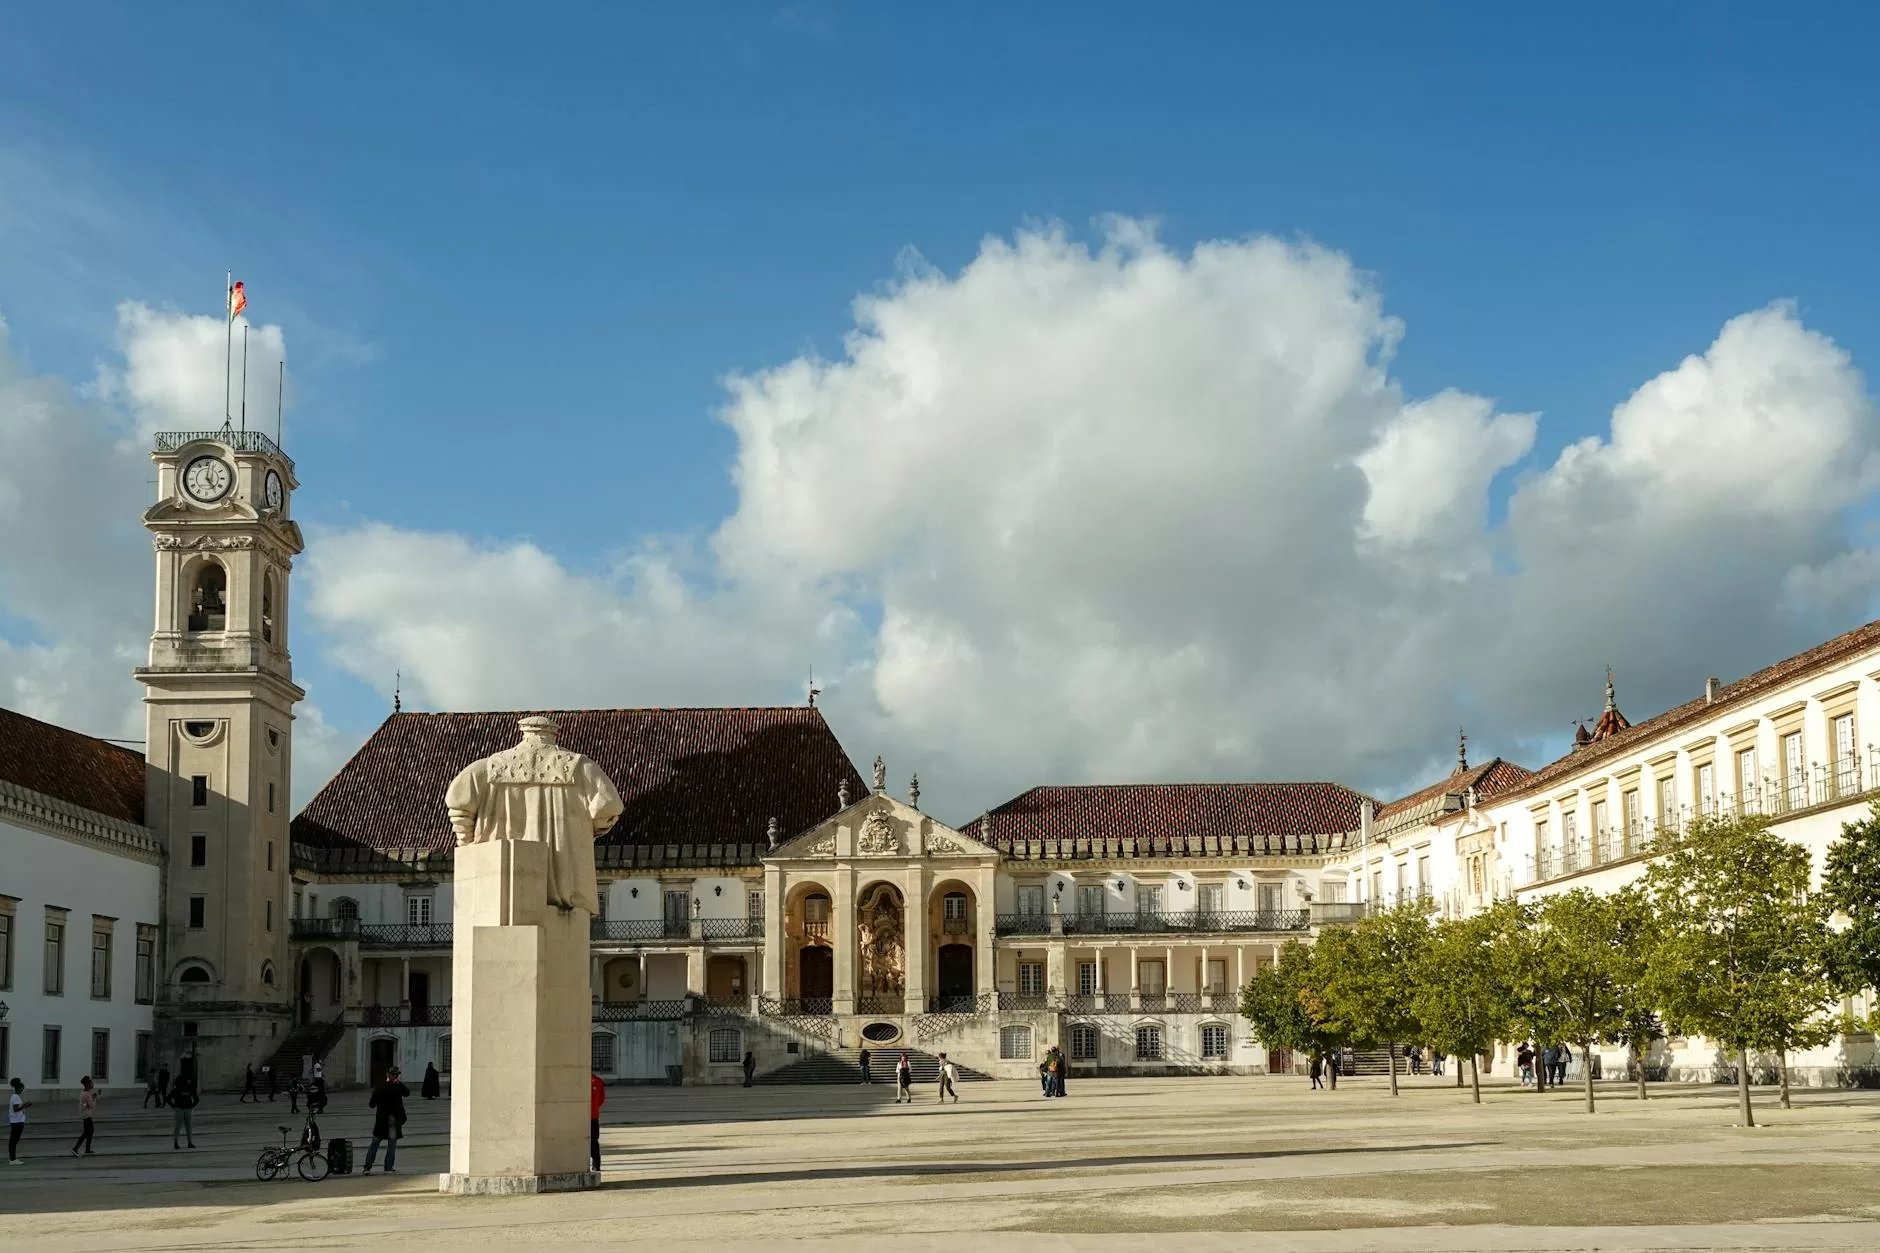 university of coimbra in portugal